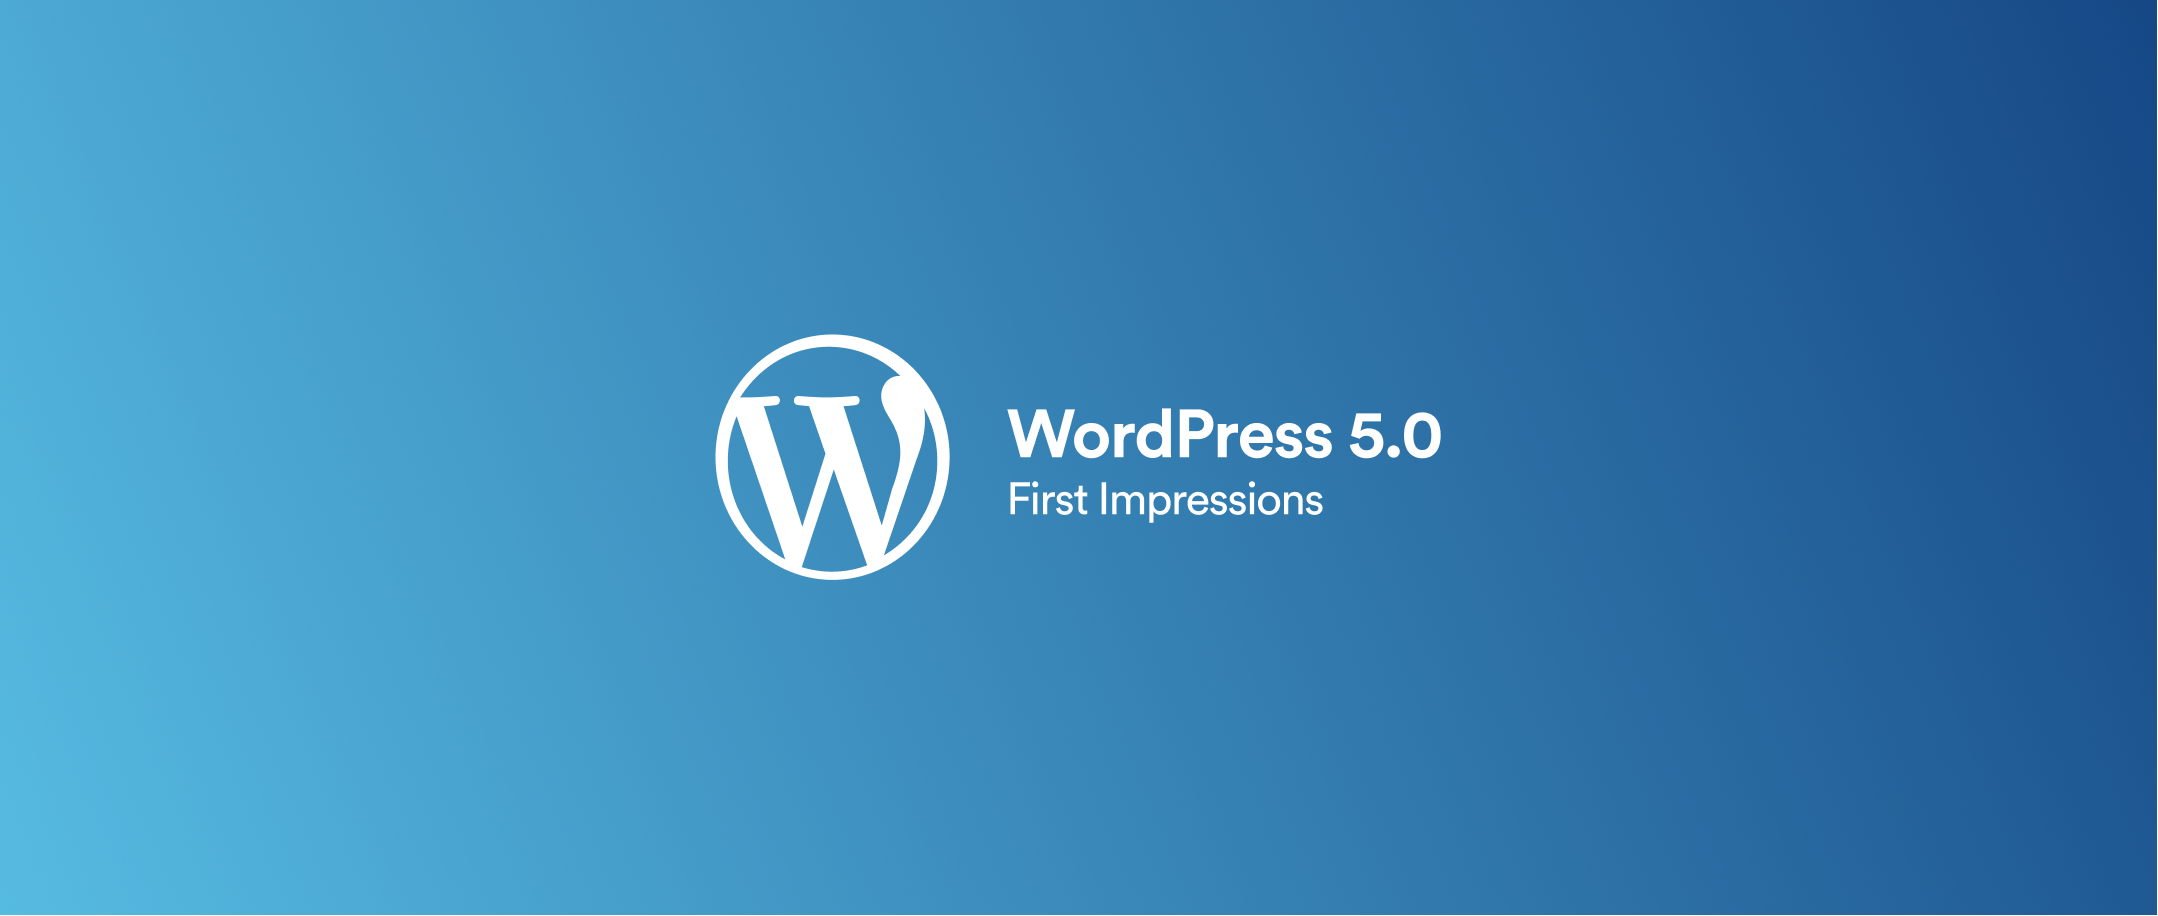 WordPress shifts to content blocks with the launch of 5.0 in beta